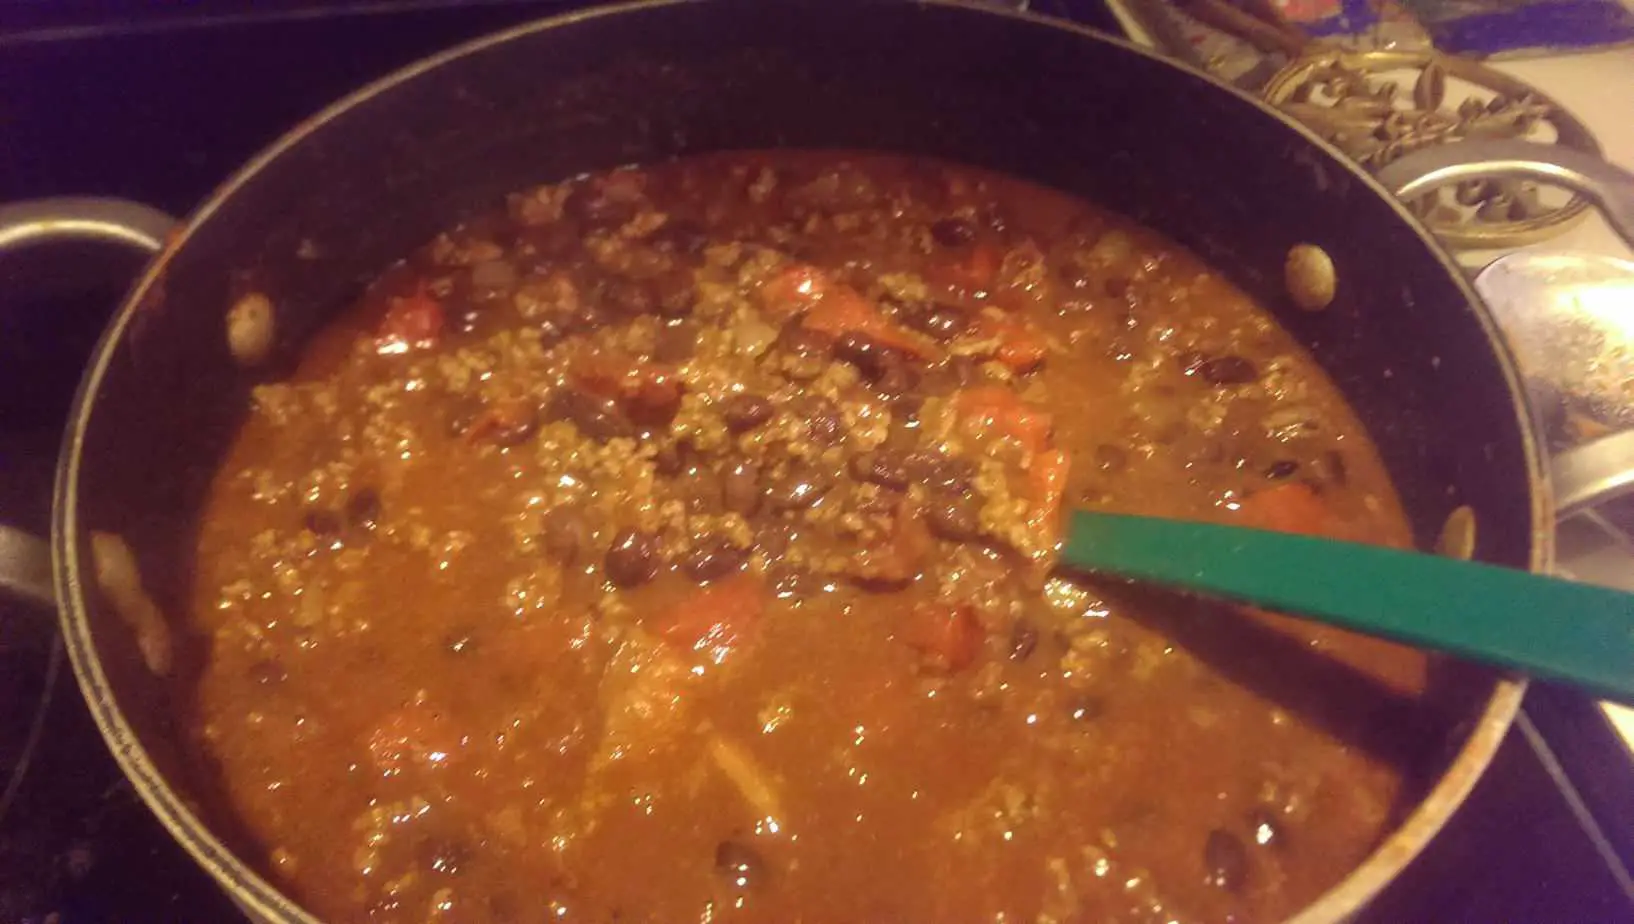 How to thicken chili - Simmer until thickened